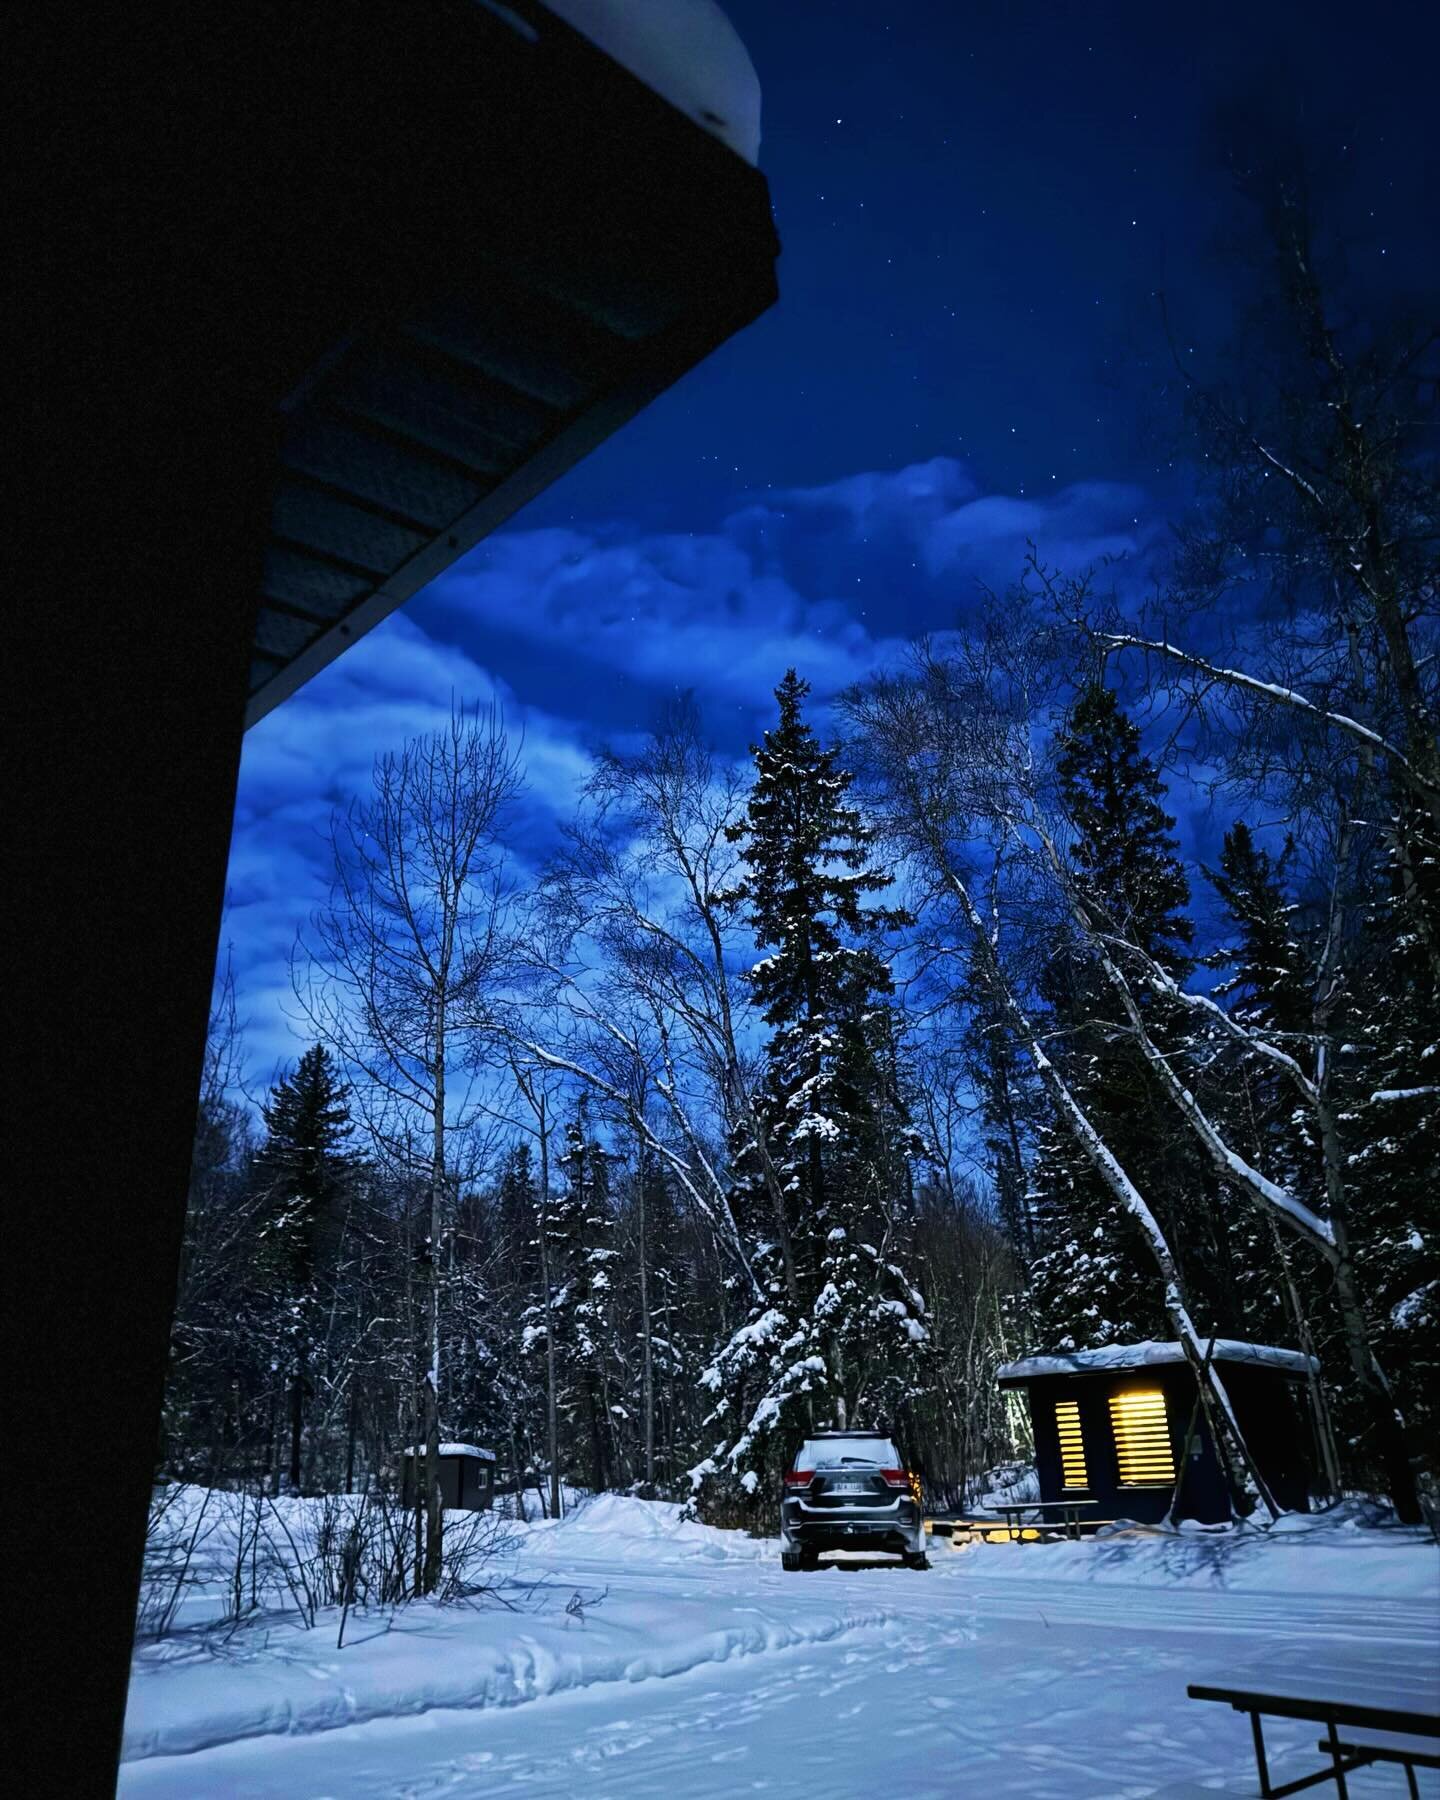 The stars
The sky
The trees
The snow 
The turtles 

🤍🩶🤍🩶

@travelmanitoba @clearlakecountry